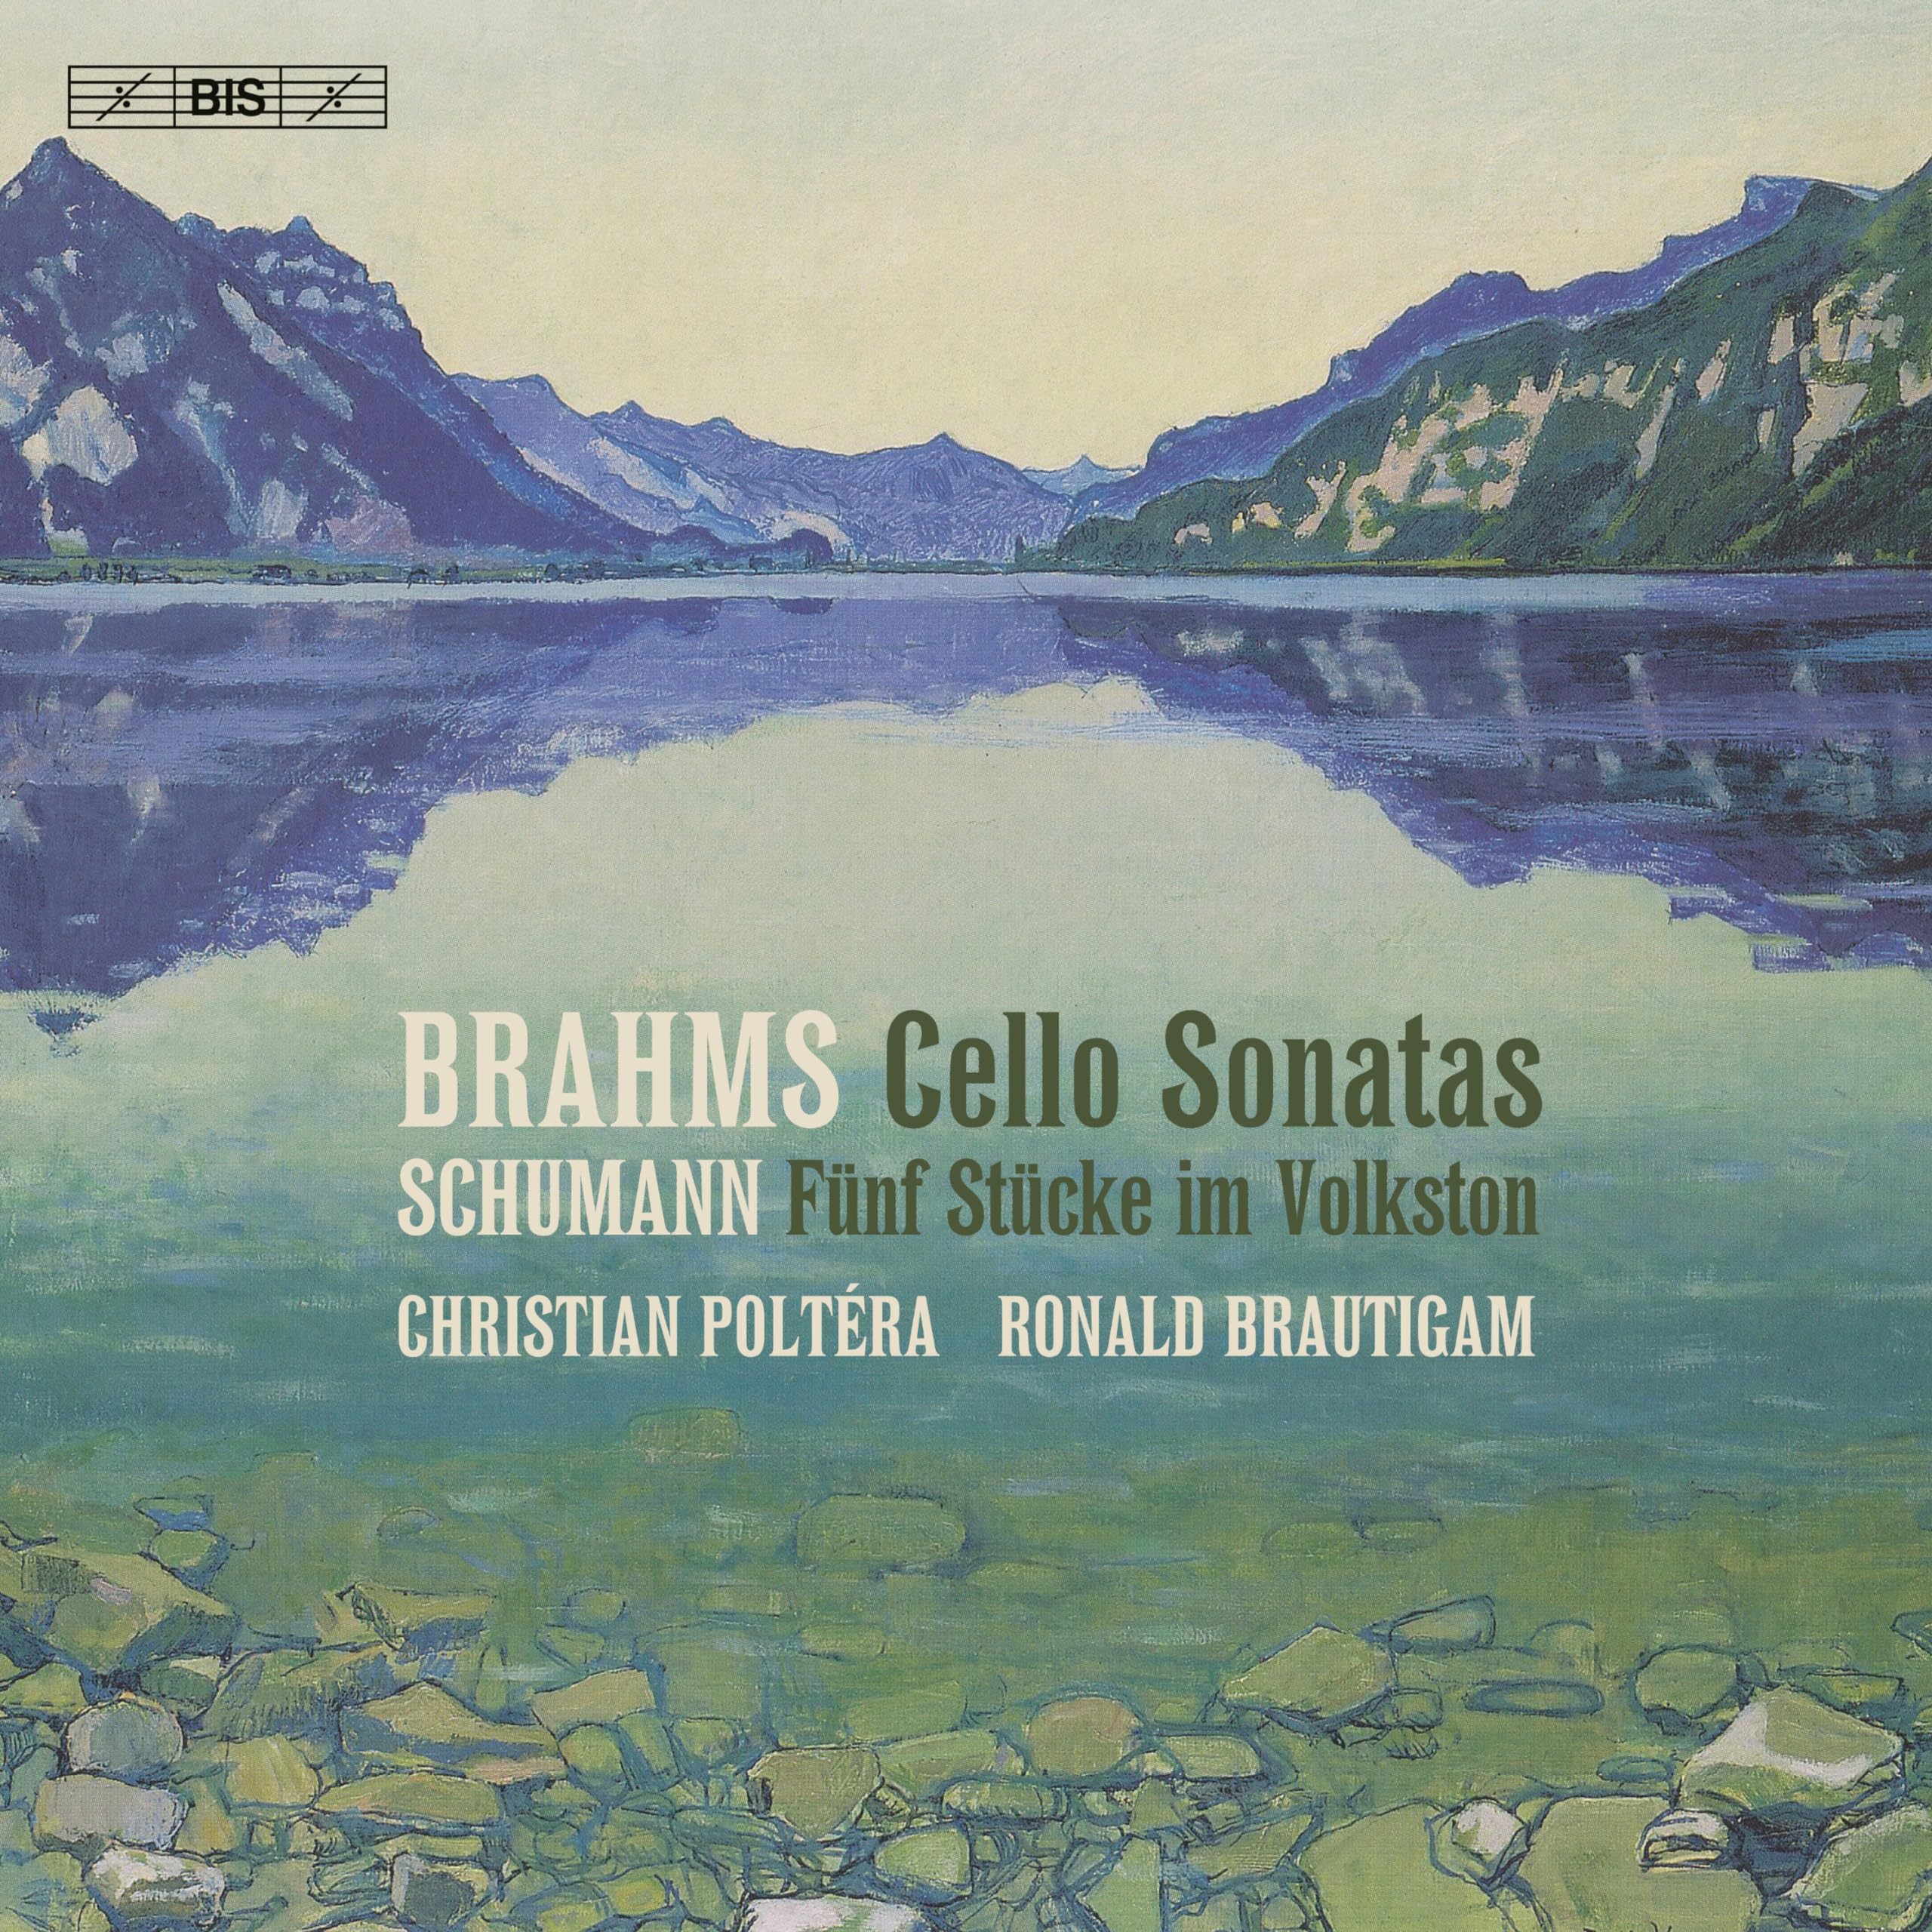 Christian Poltéra, Ronald Brautigam - Brahms & Schumann - Works for Cello and Piano (2024) [FLAC 24bit/96kHz] Download